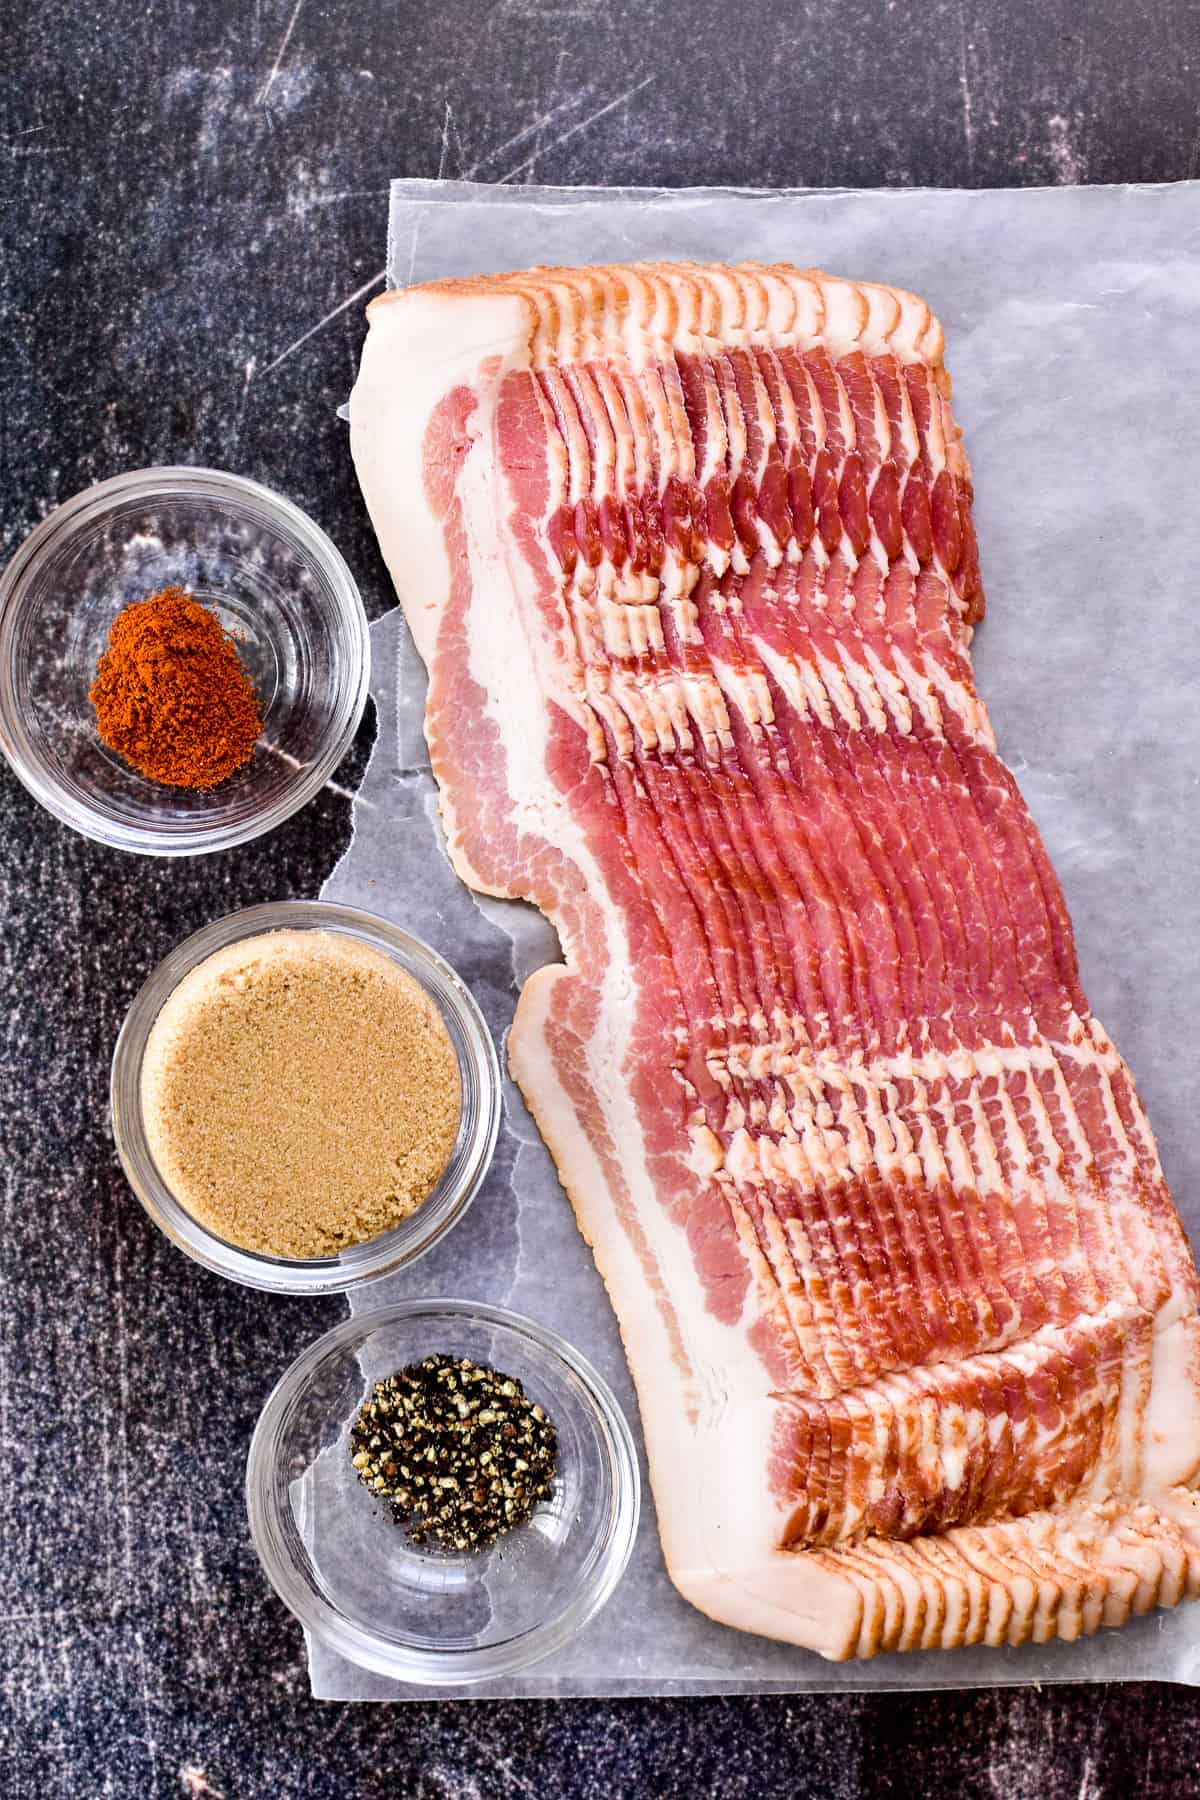 Candied Bacon ingredients